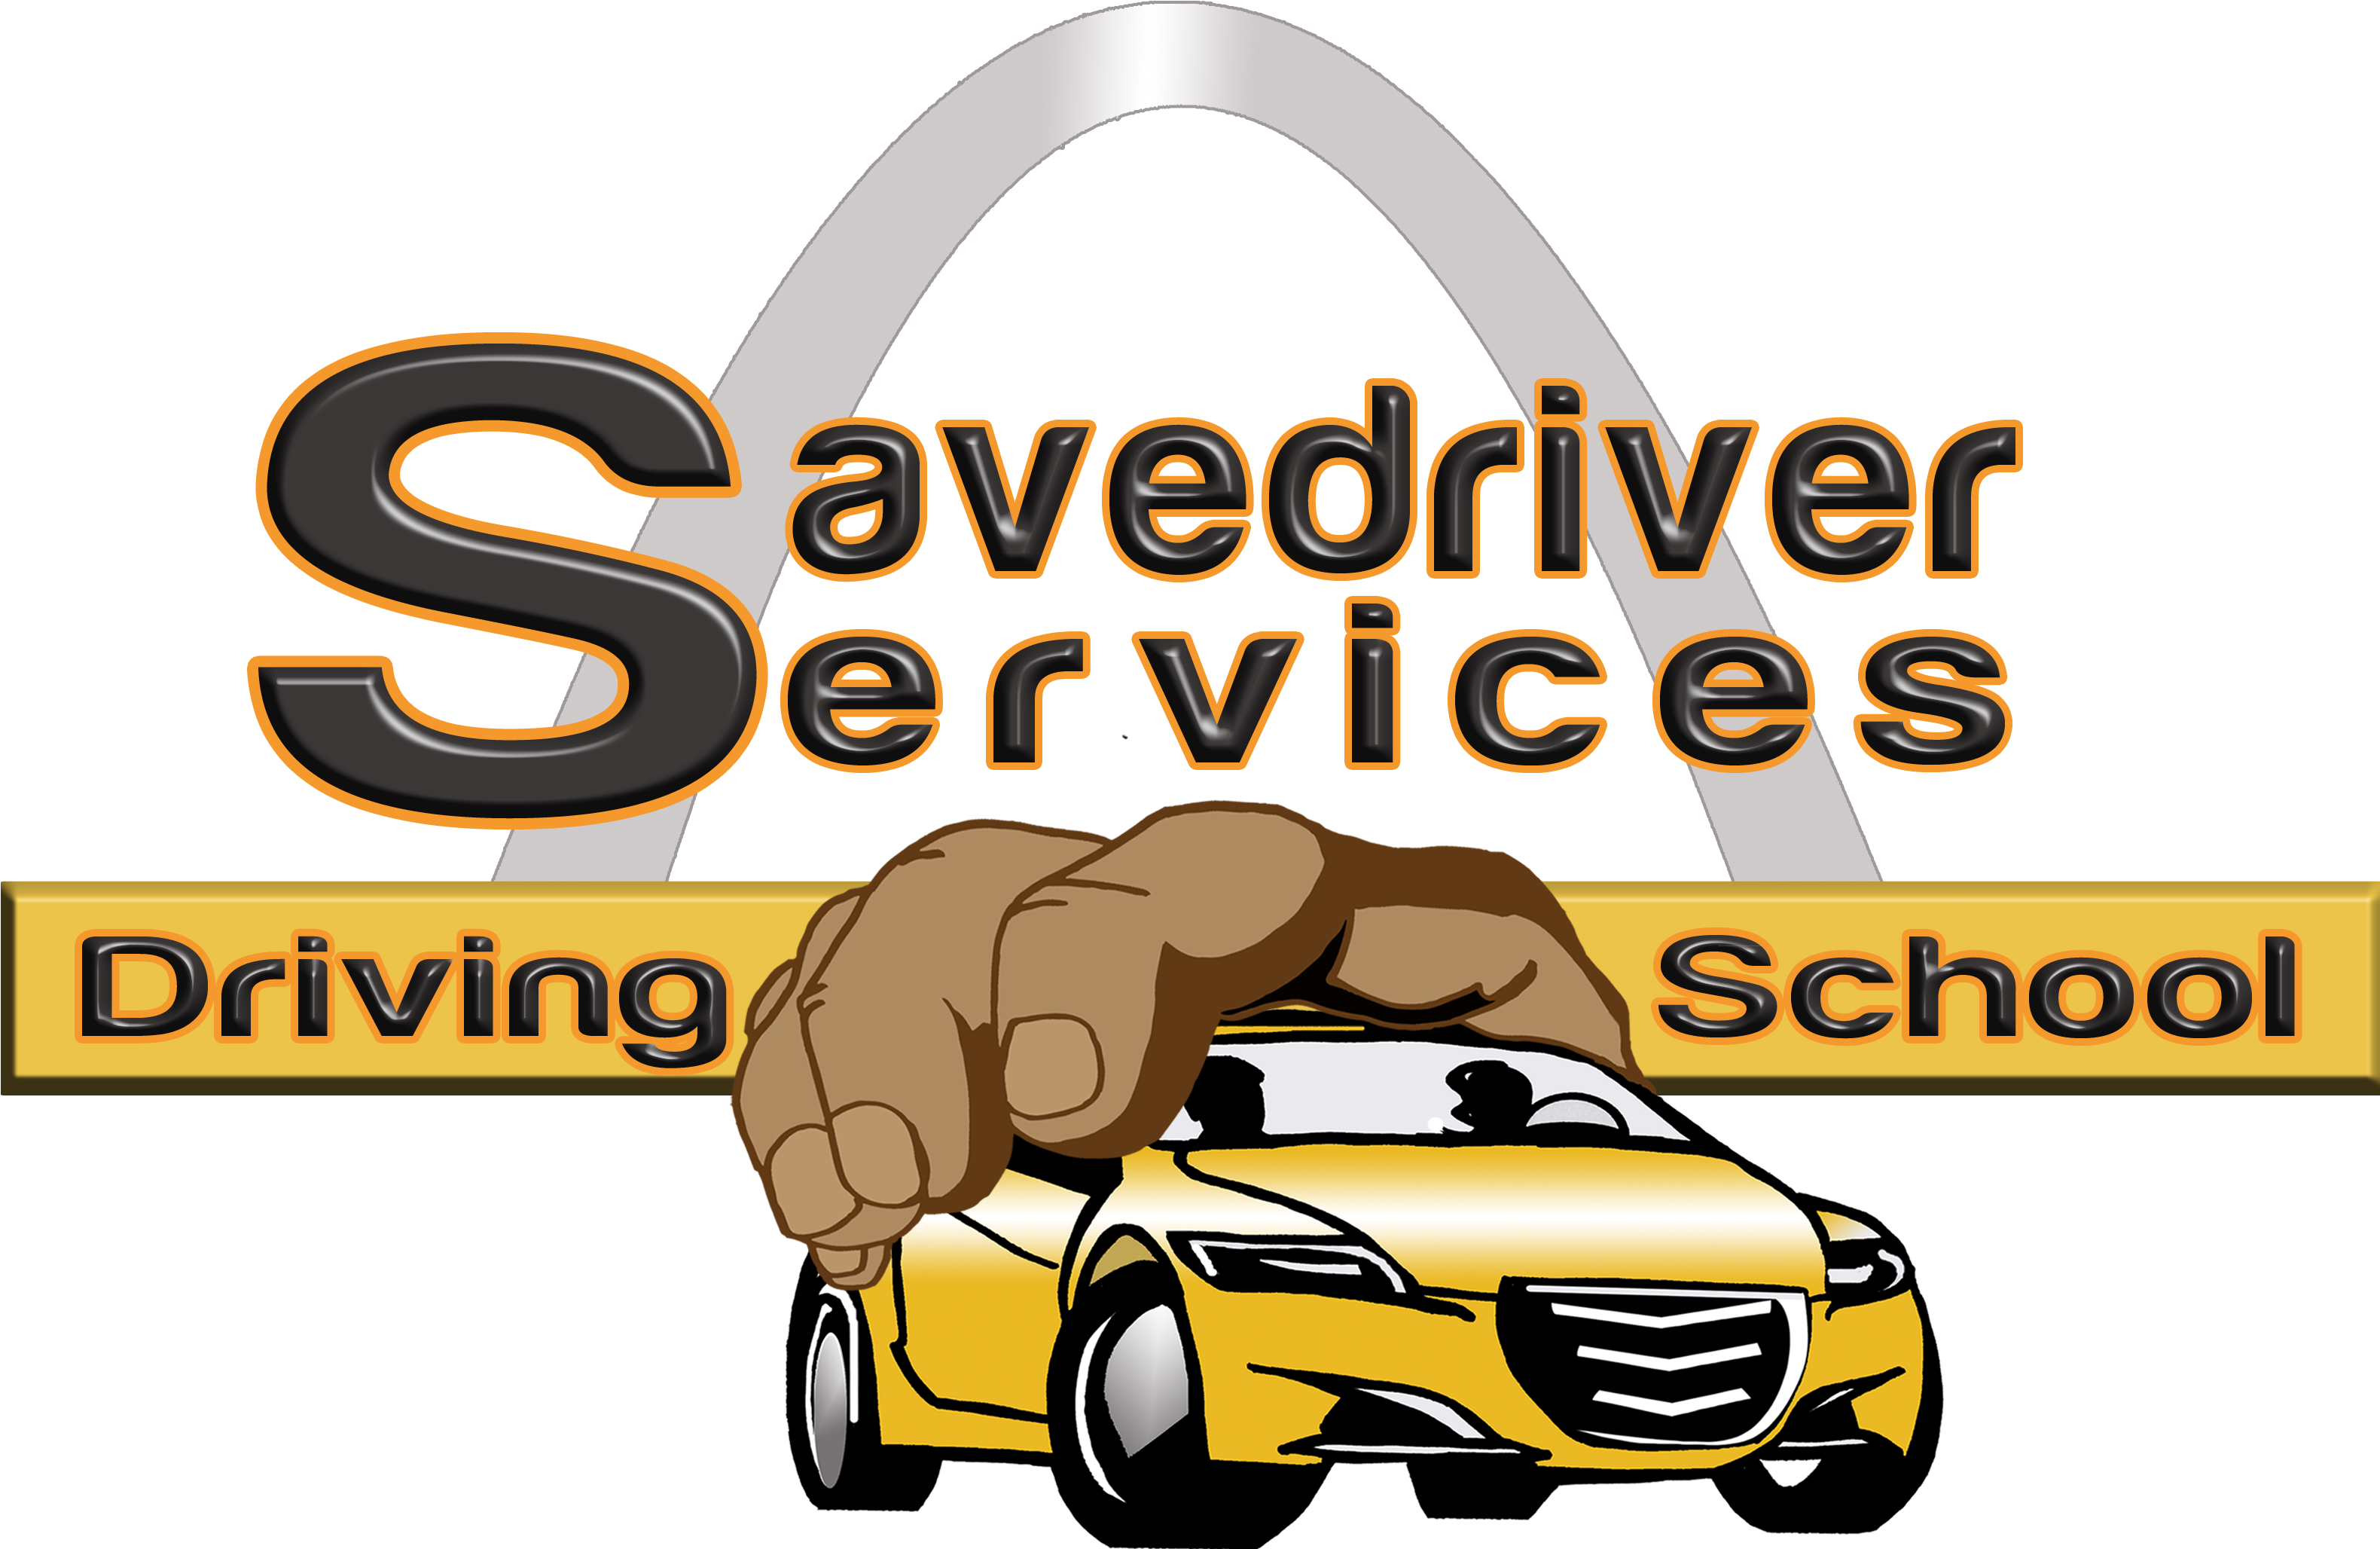 Savedrivers Services Driving School Of St - Savedriver Services Driving School Of St. Louis (3159x2087)